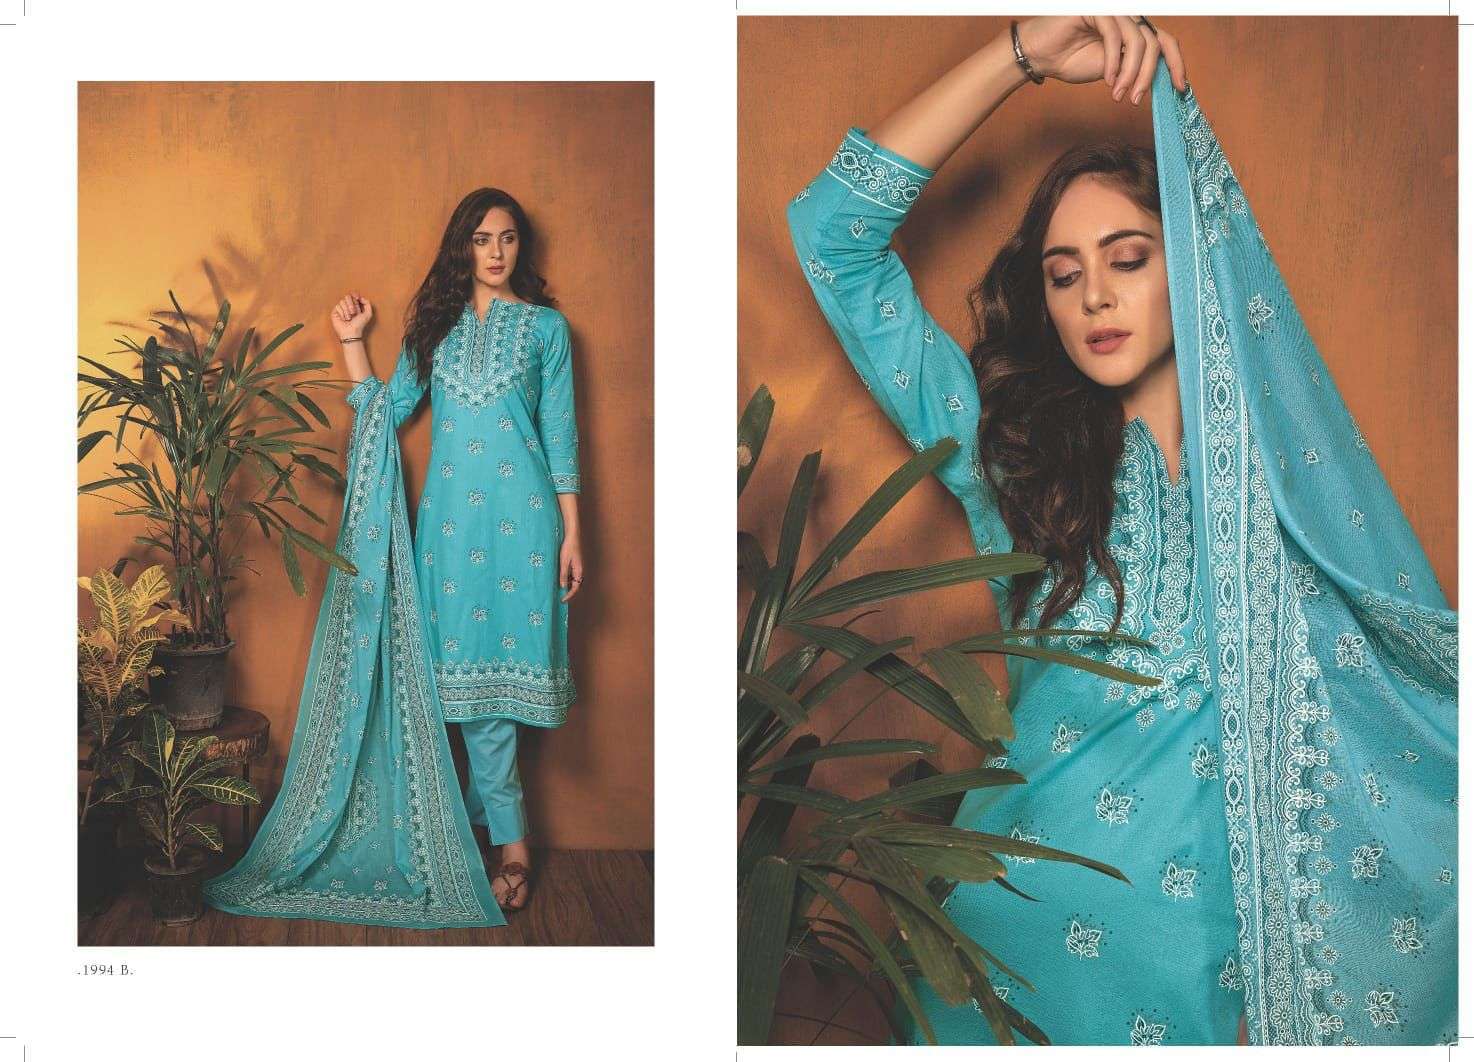 NIYAMAT BY RIVAA 1994-A TO 1997-B SERIES INDIAN SUITS BEAUTIFUL FANCY COLORFUL STYLISH PARTY WEAR & OCCASIONAL WEAR PURE COTTON PRINT DRESSES AT WHOLESALE PRICE